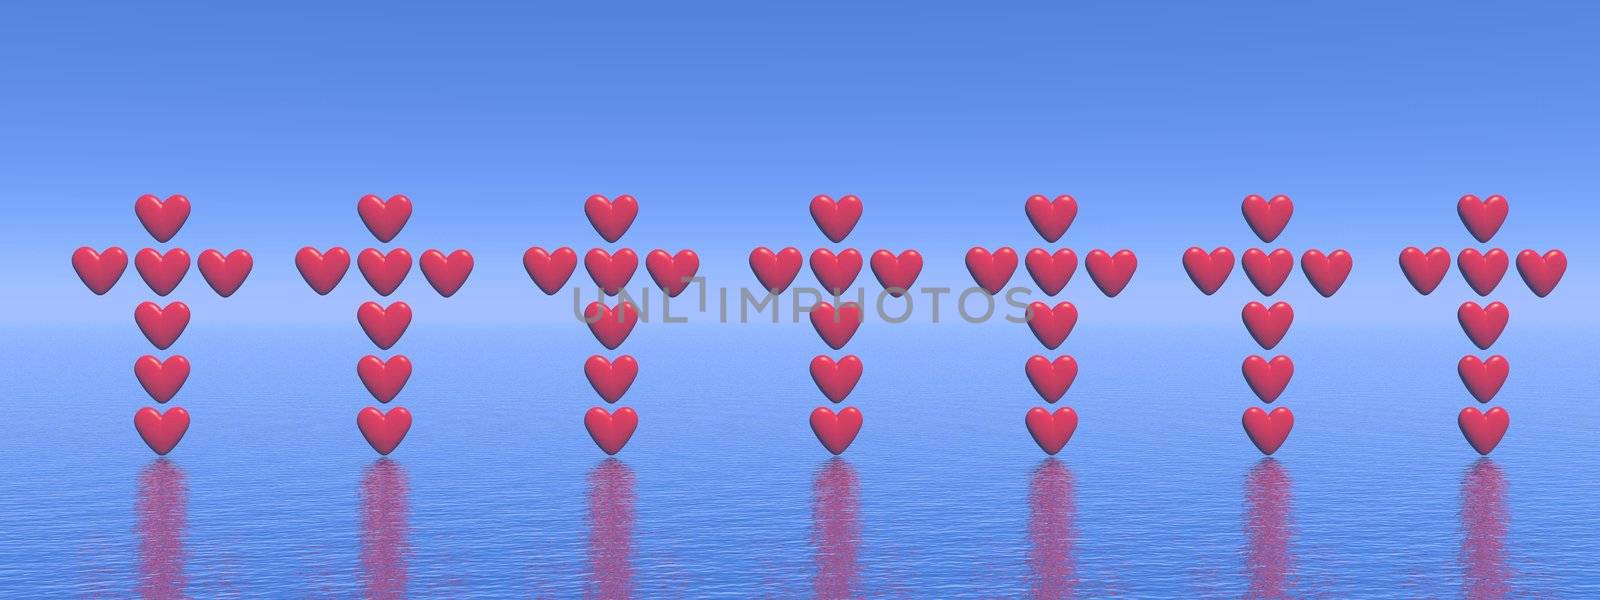 Many crosses made of heart in a row upon ocean in blue background